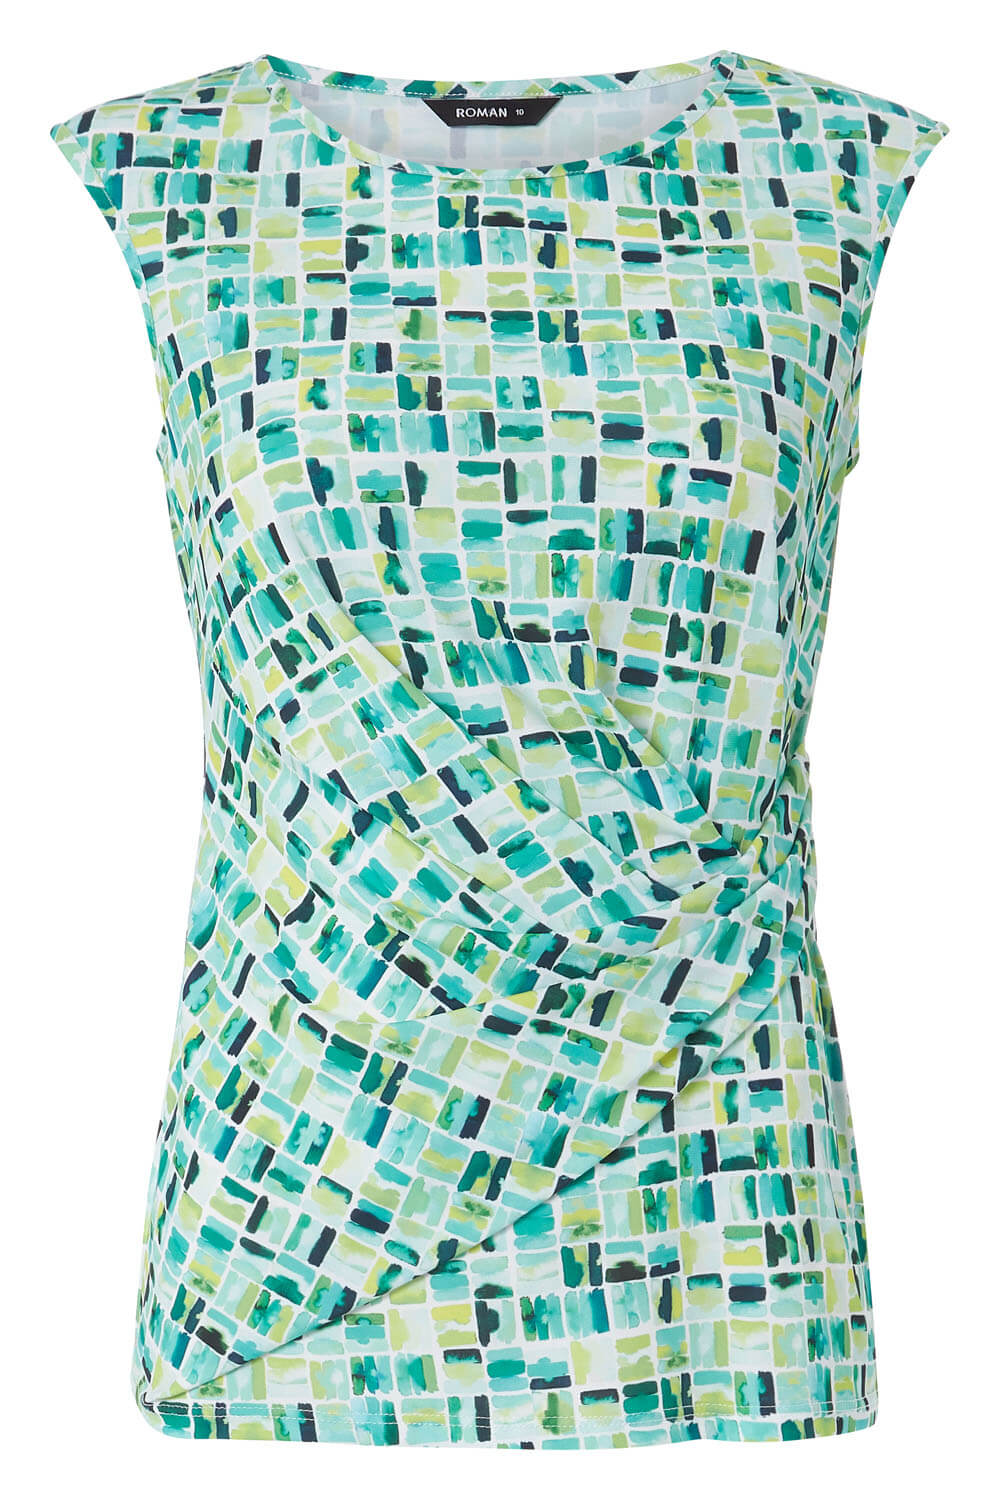 Green Tile Print Side Twist Jersey Top, Image 5 of 5